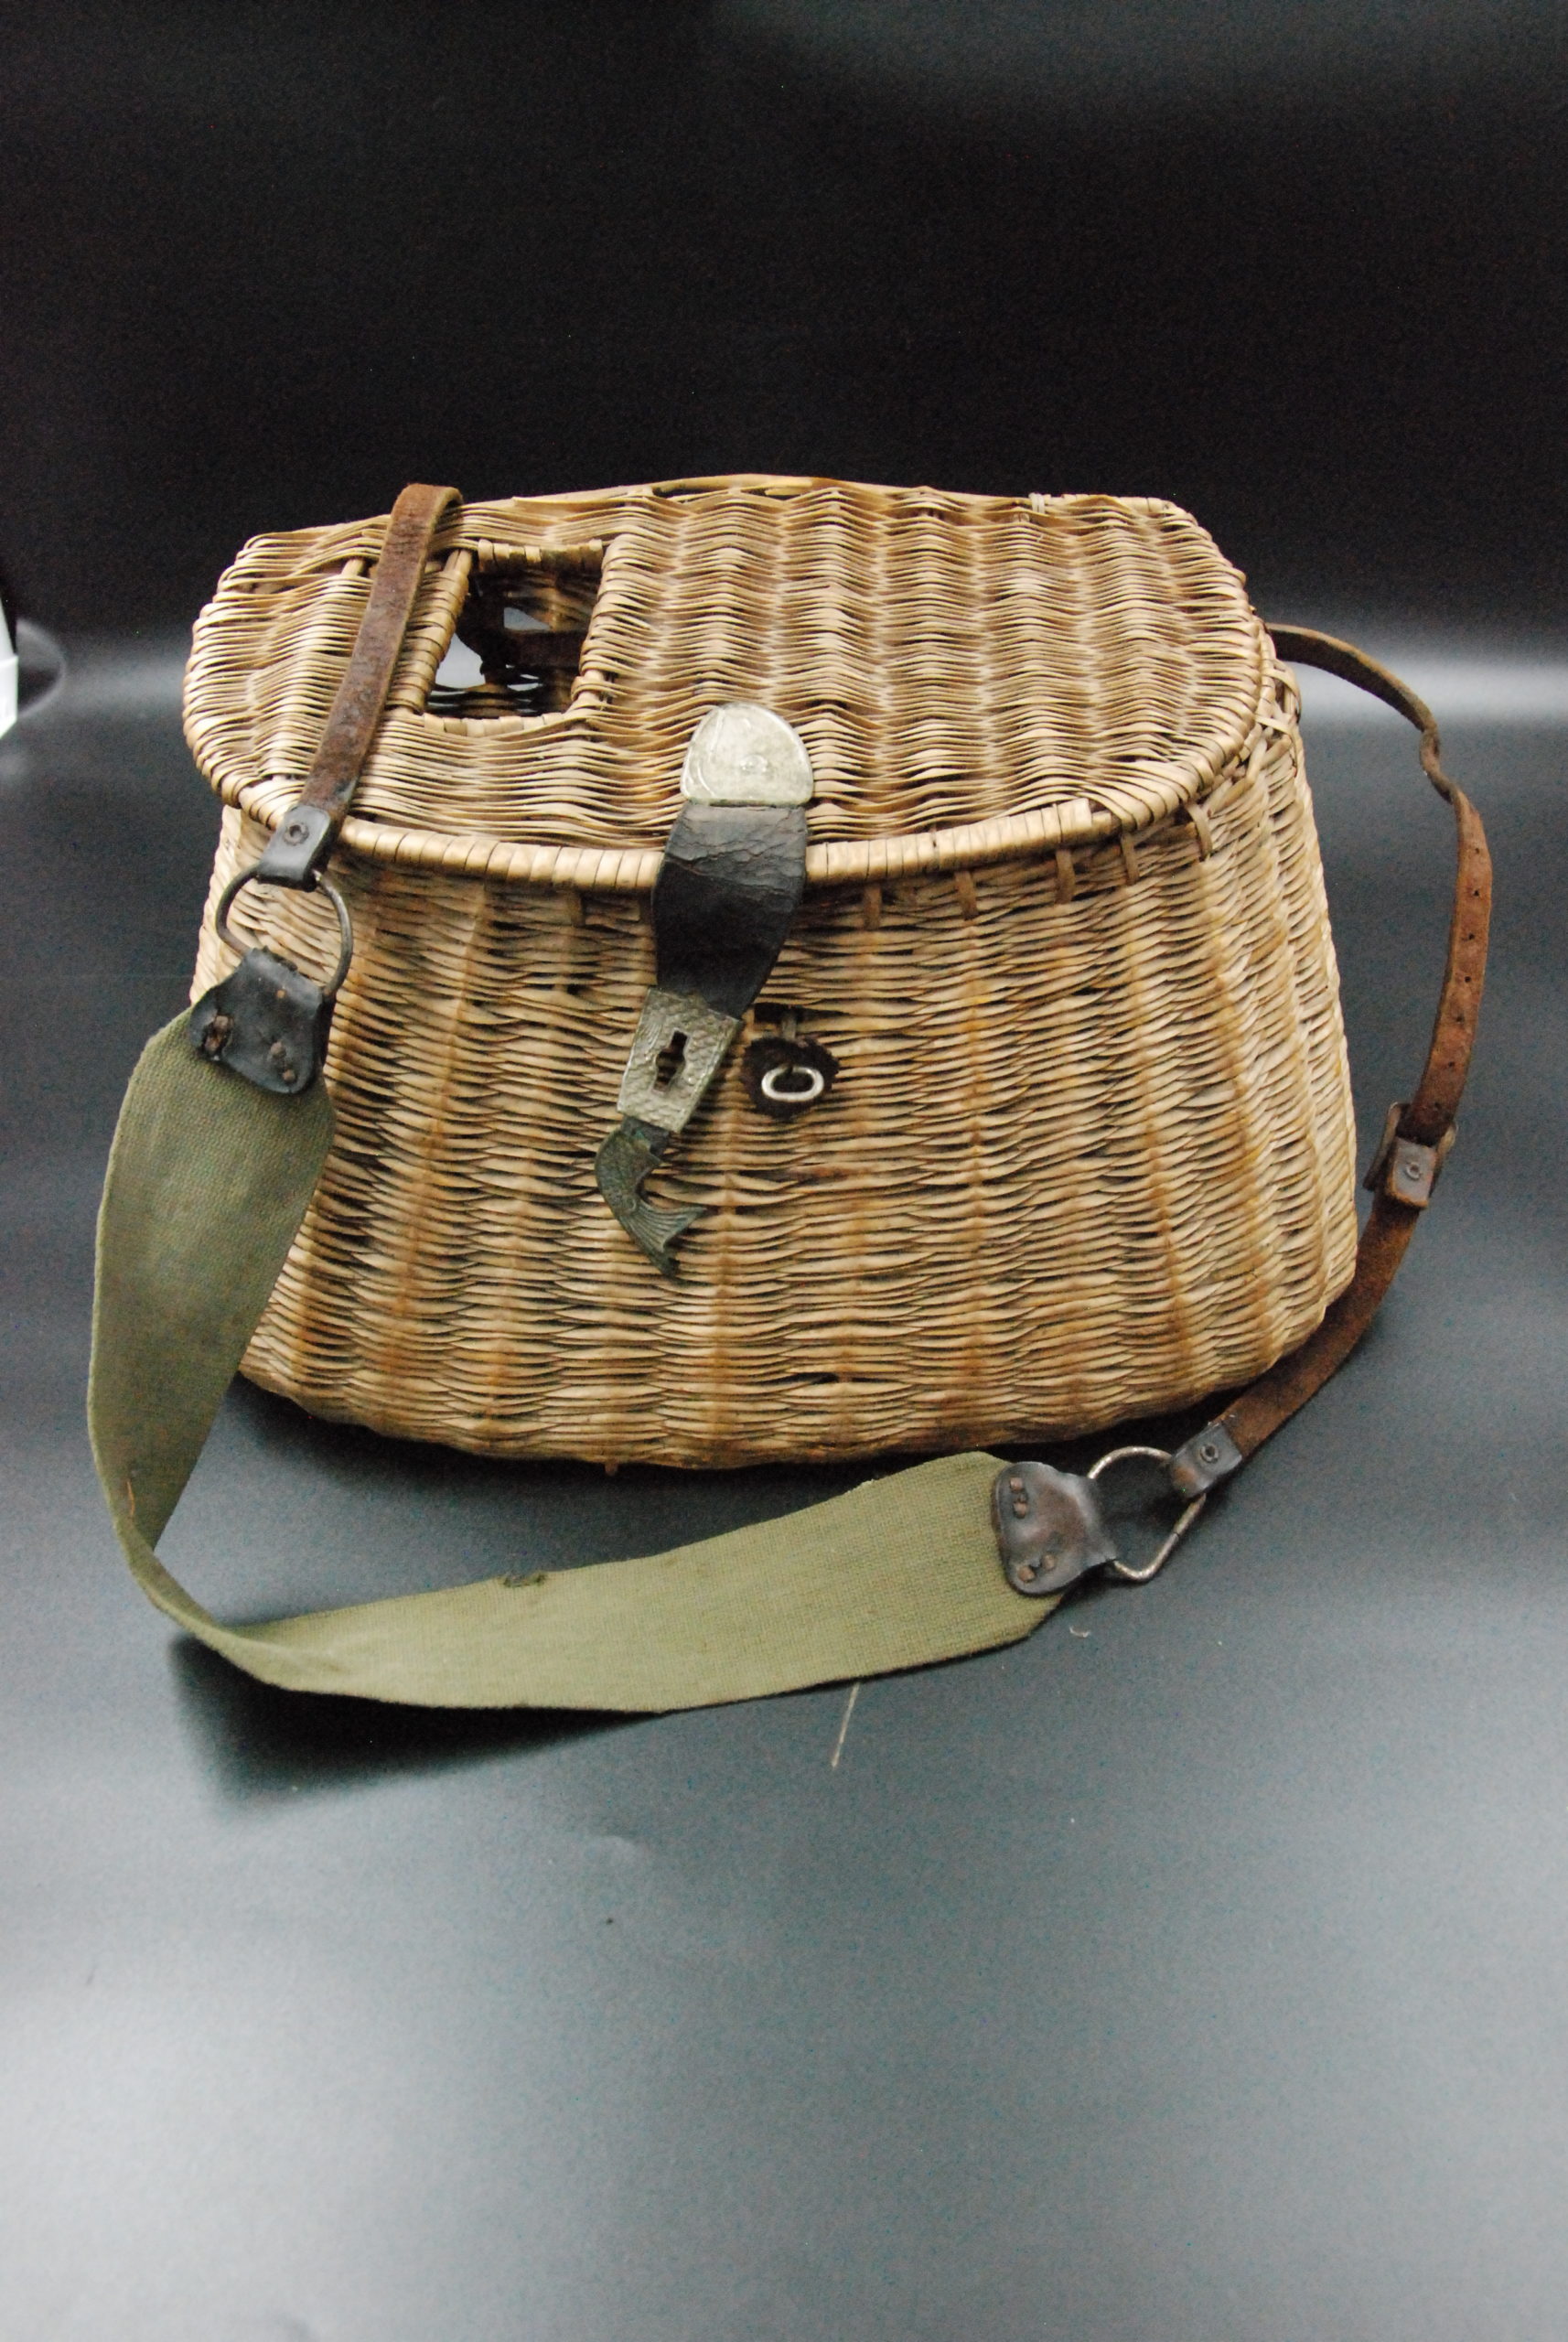 OLD SCHOOL/RETRO SHAKESPEARE CANVAS TROUT FISHING BAG – Vintage